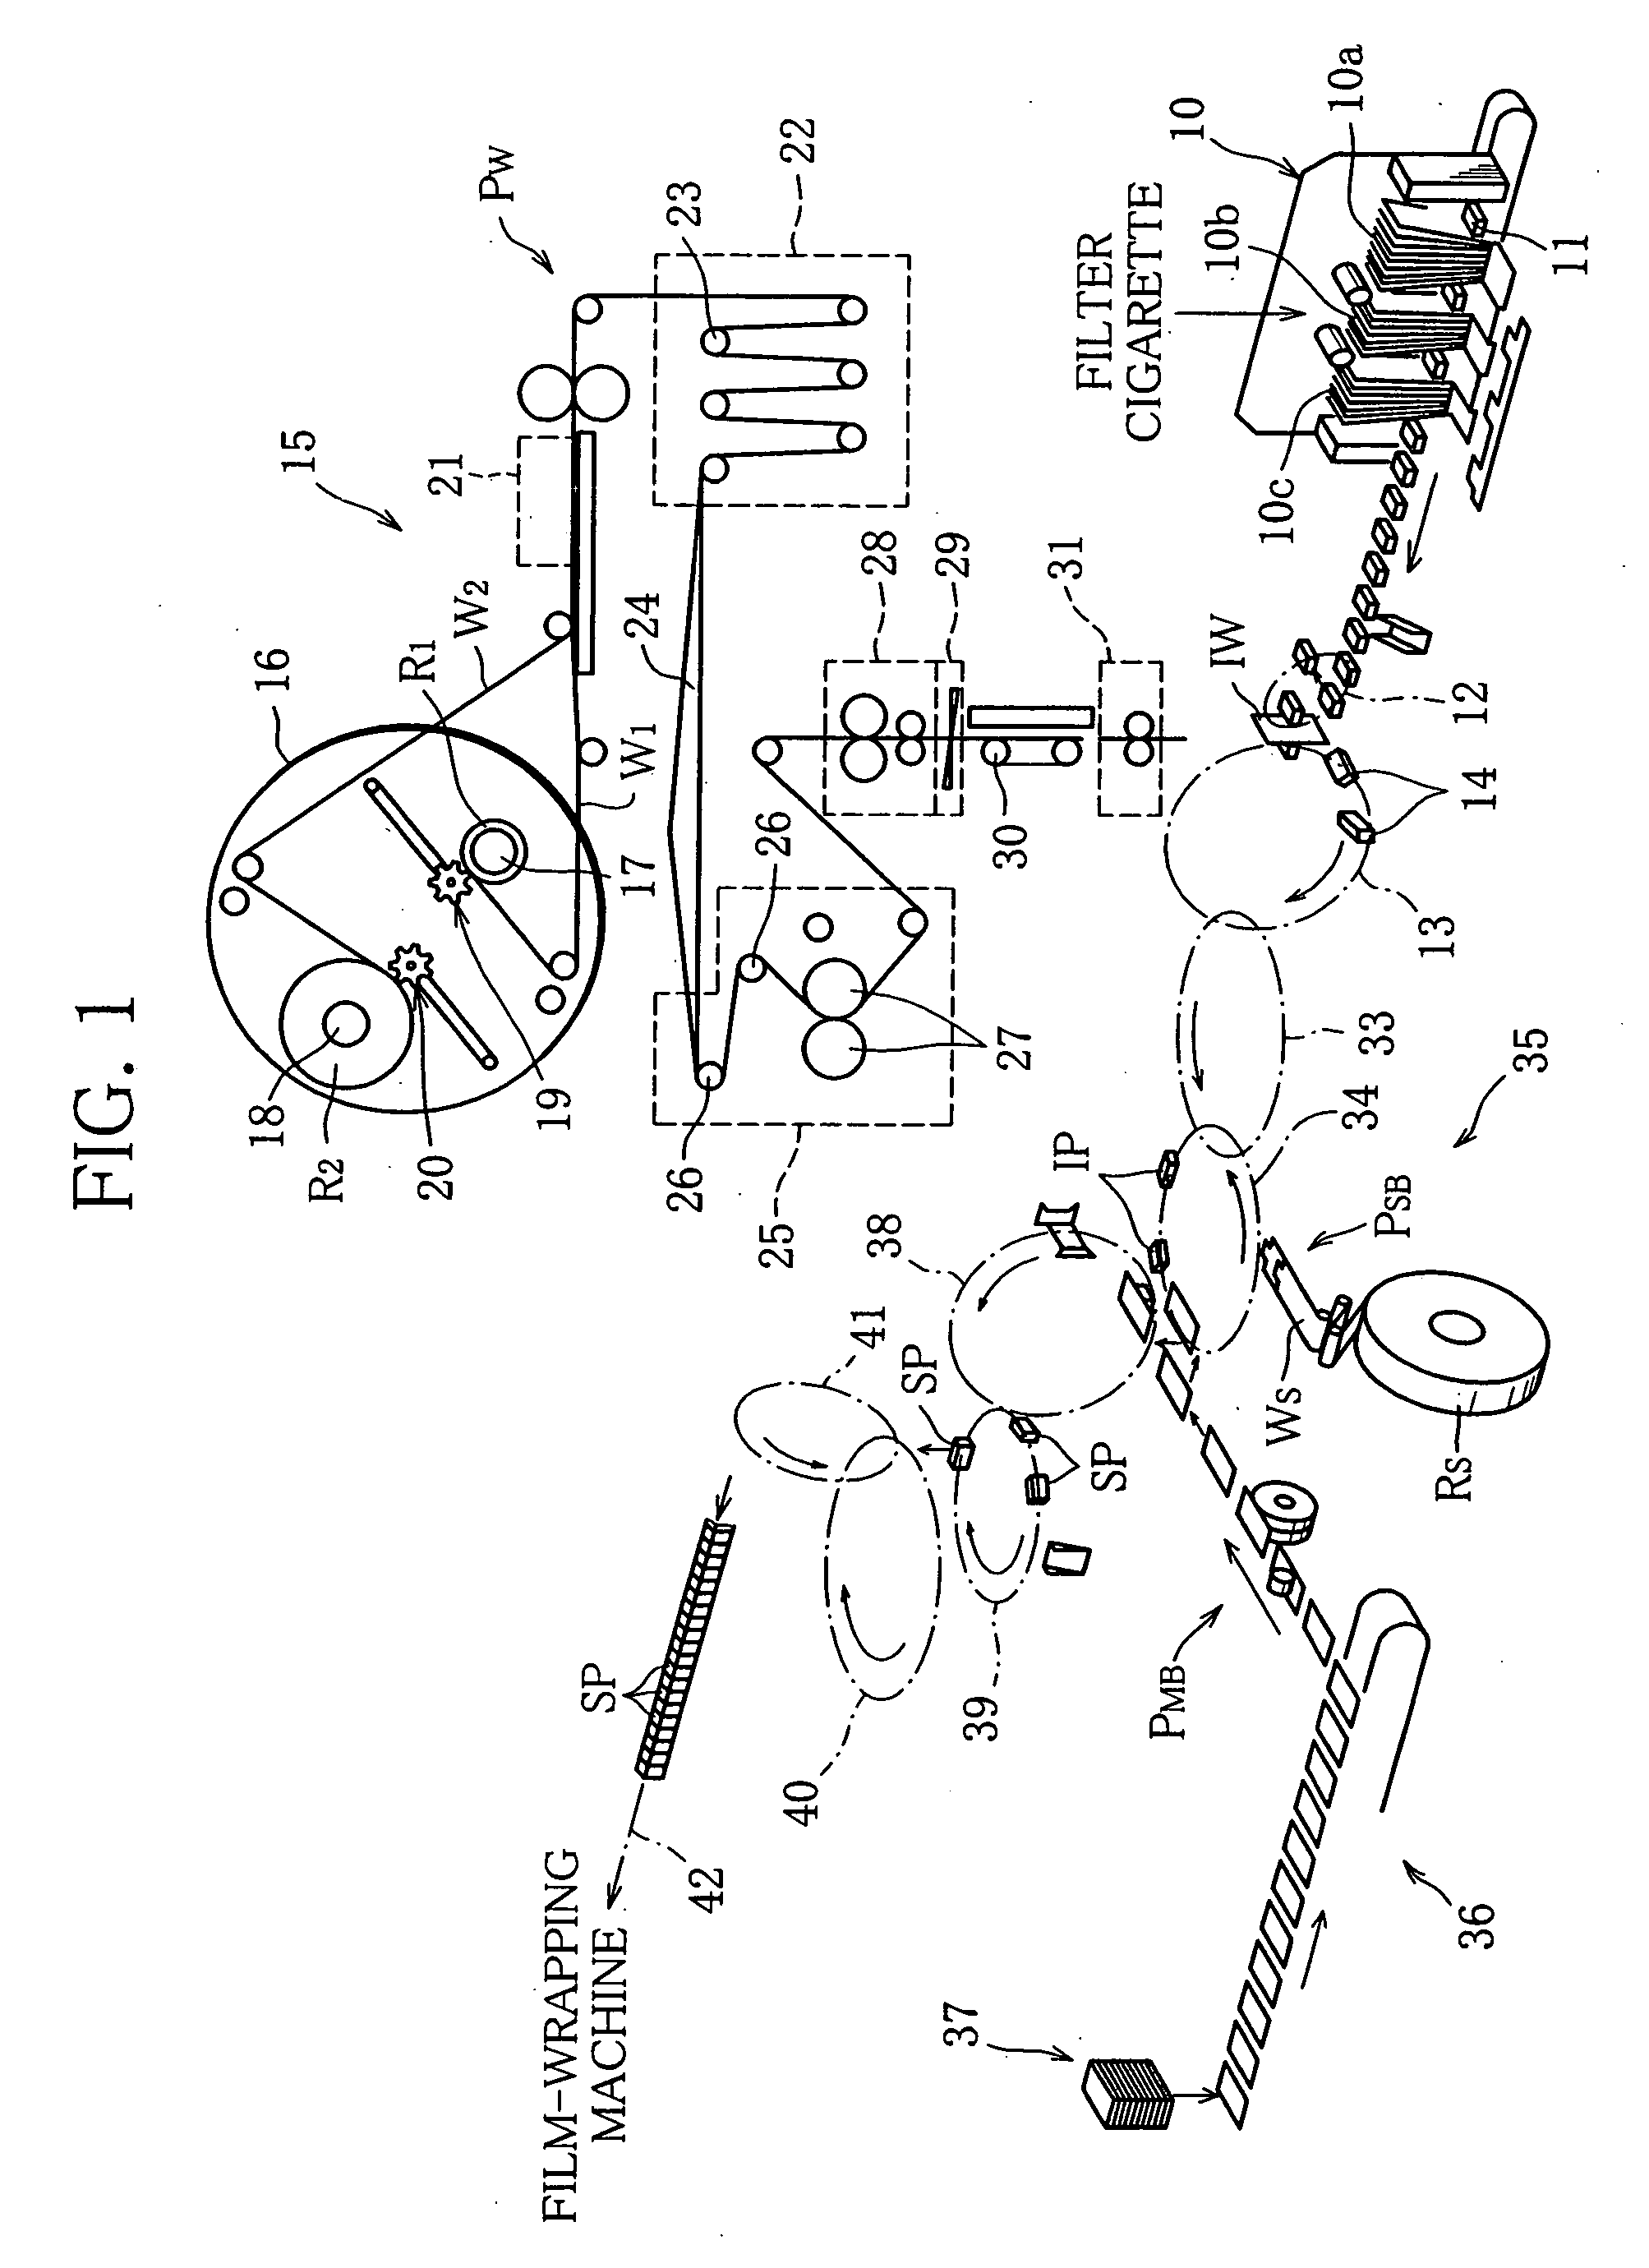 Apparatus for feeding inner wrapper for wrapping cigarette bundles